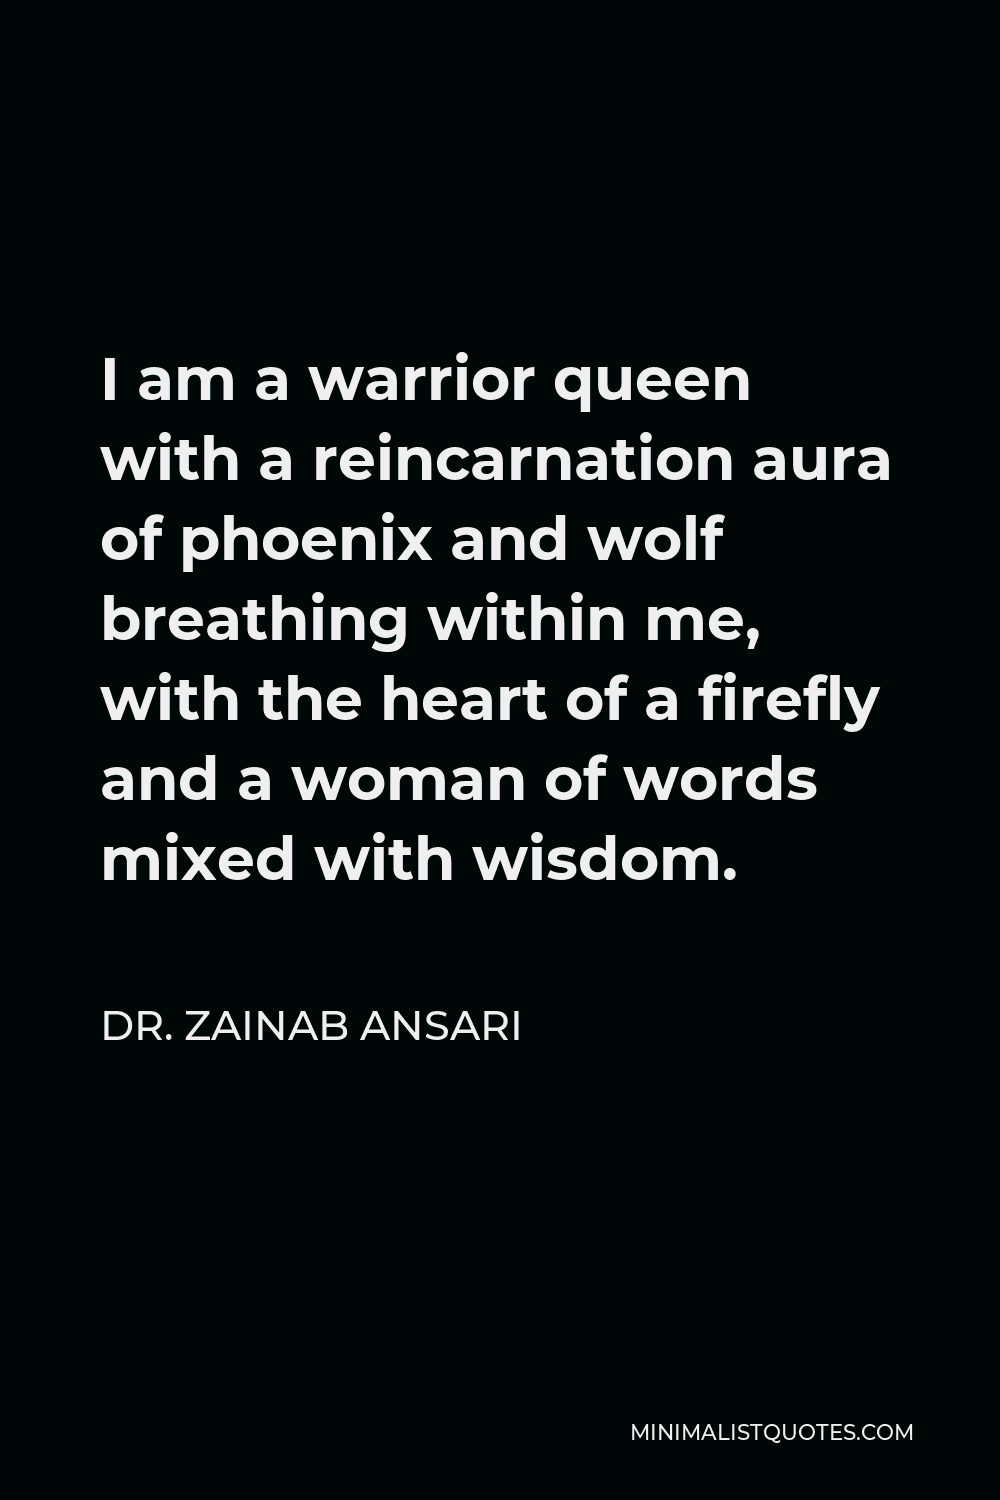 Dr. Zainab Ansari Quote - I am a warrior queen with a reincarnation aura of phoenix and wolf breathing within me, with the heart of a firefly and a woman of words mixed with wisdom.